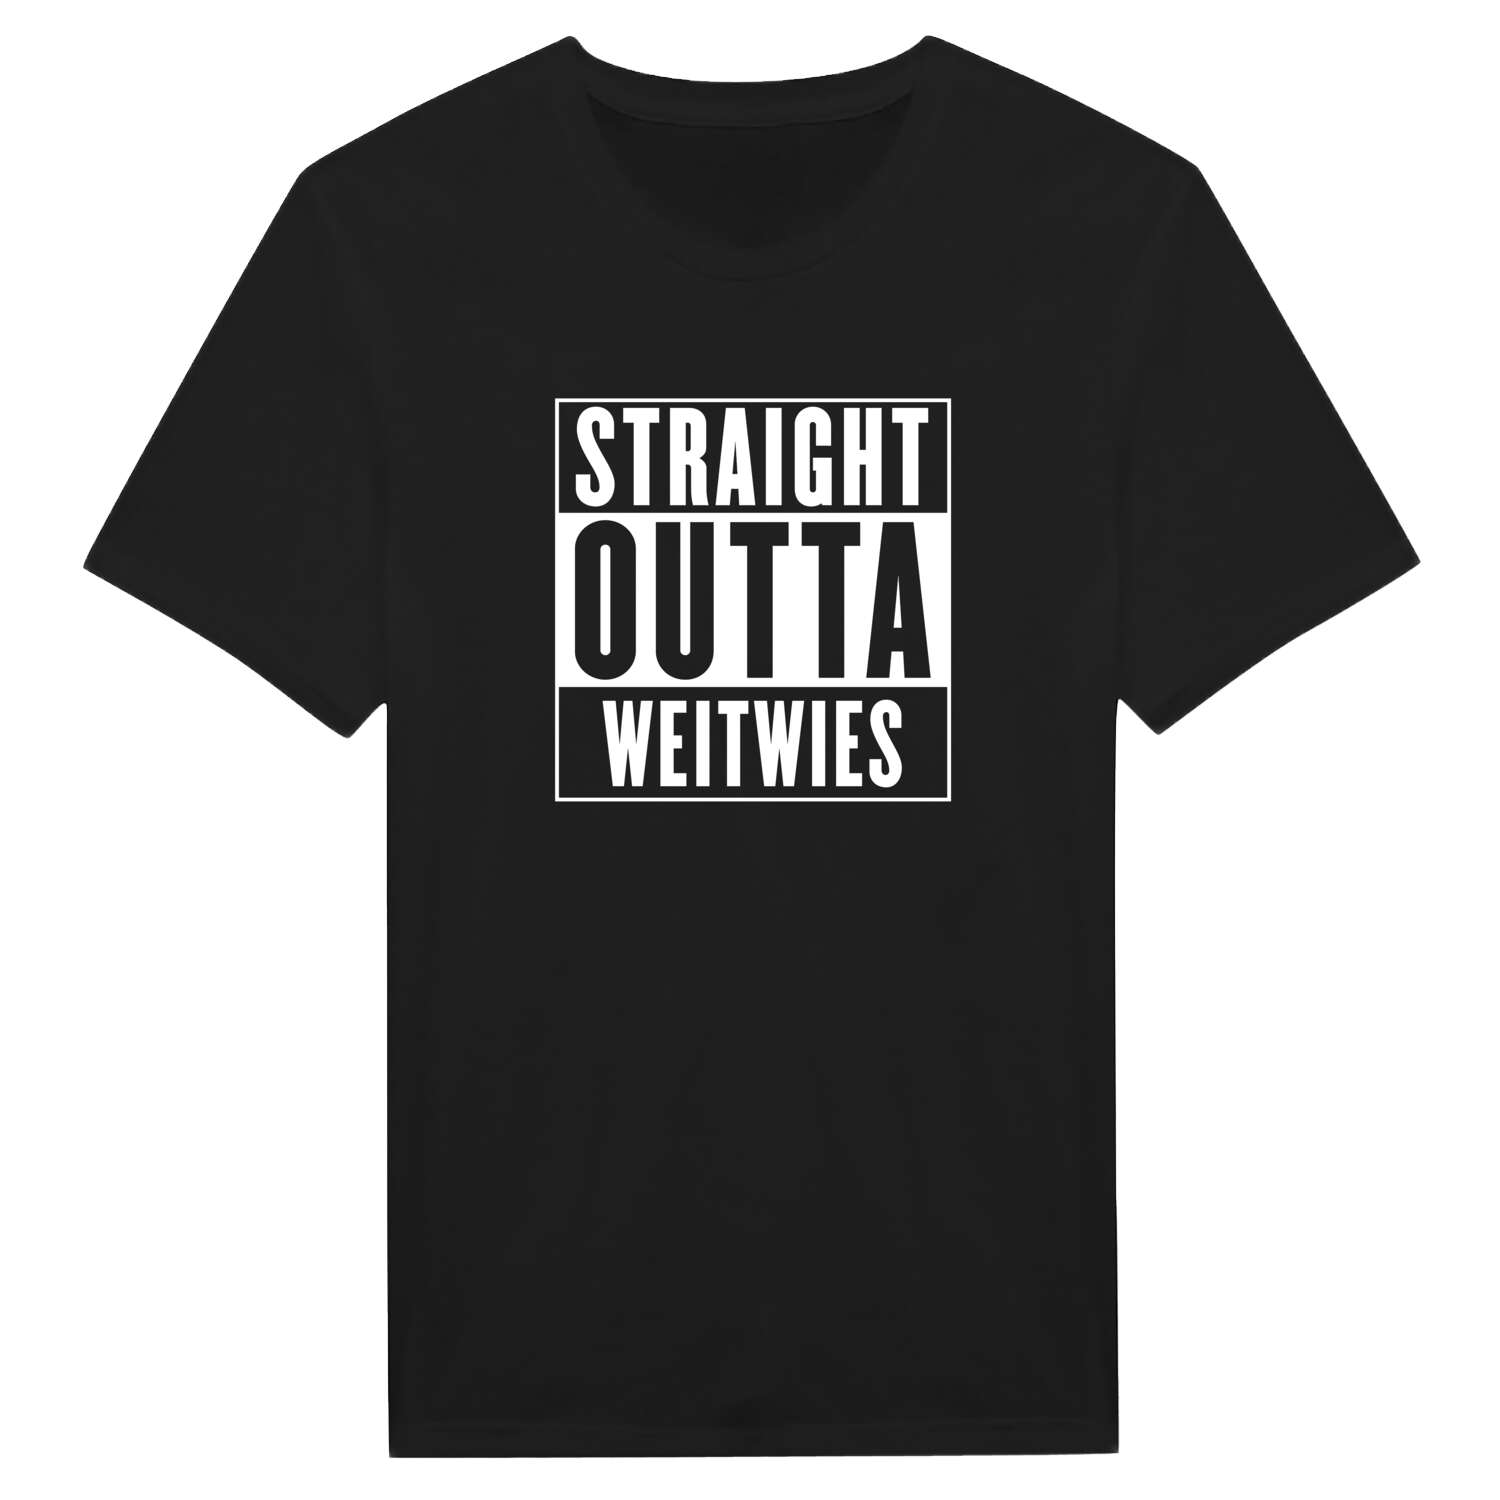 Weitwies T-Shirt »Straight Outta«